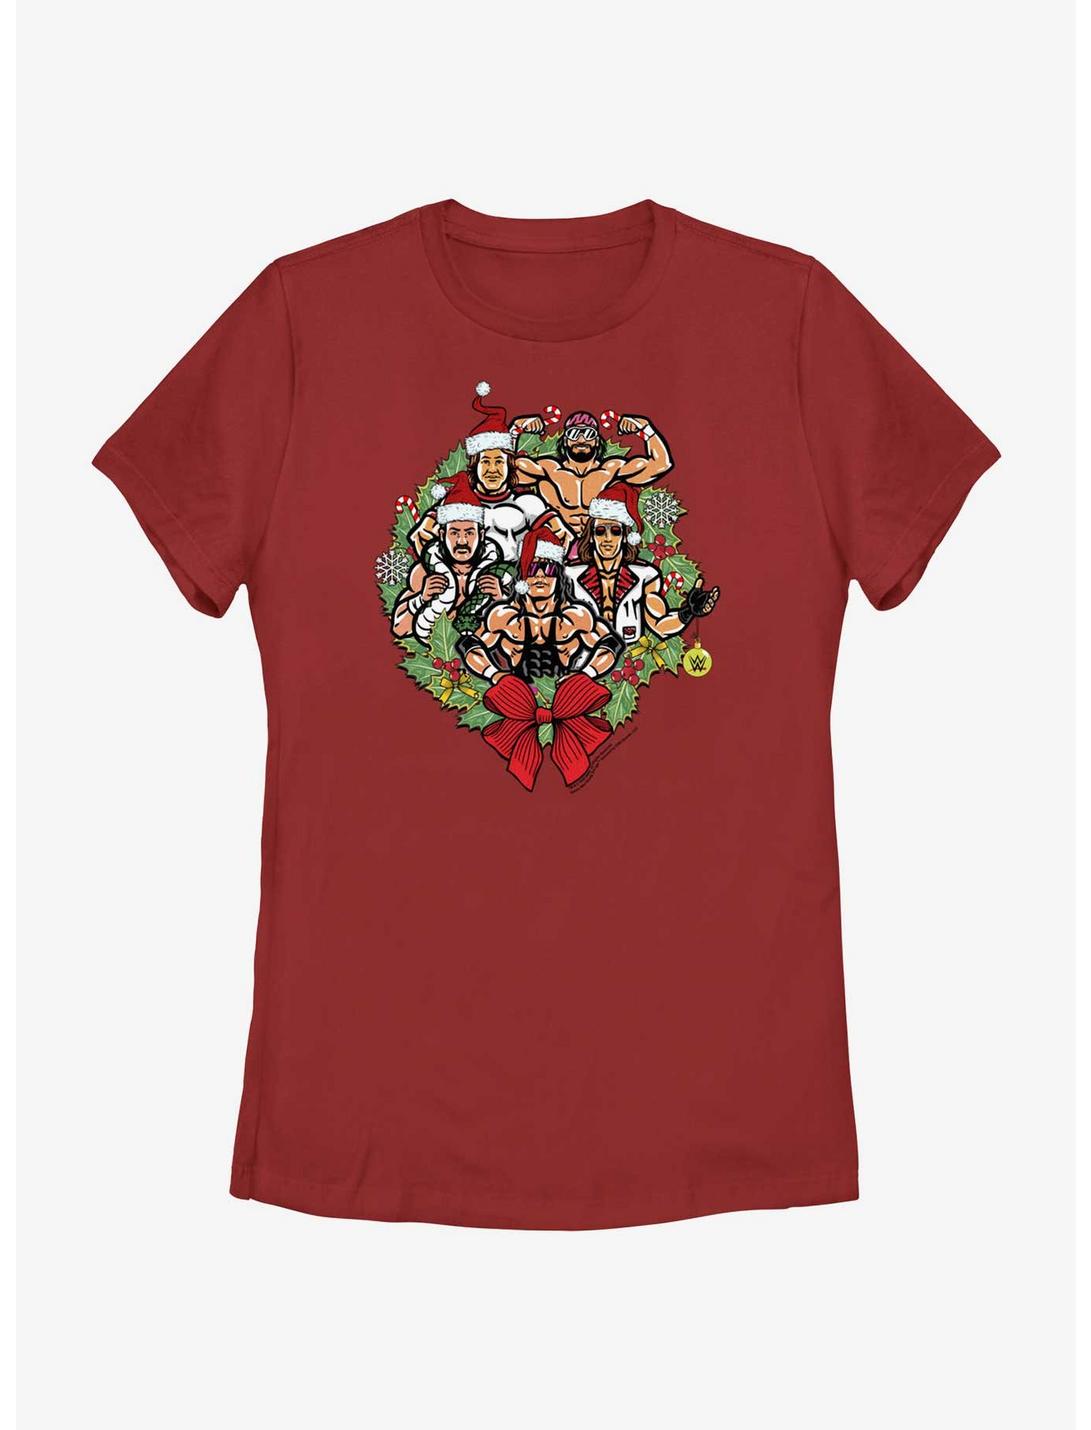 WWE Holiday Legends Wreath Womens T-Shirt, RED, hi-res